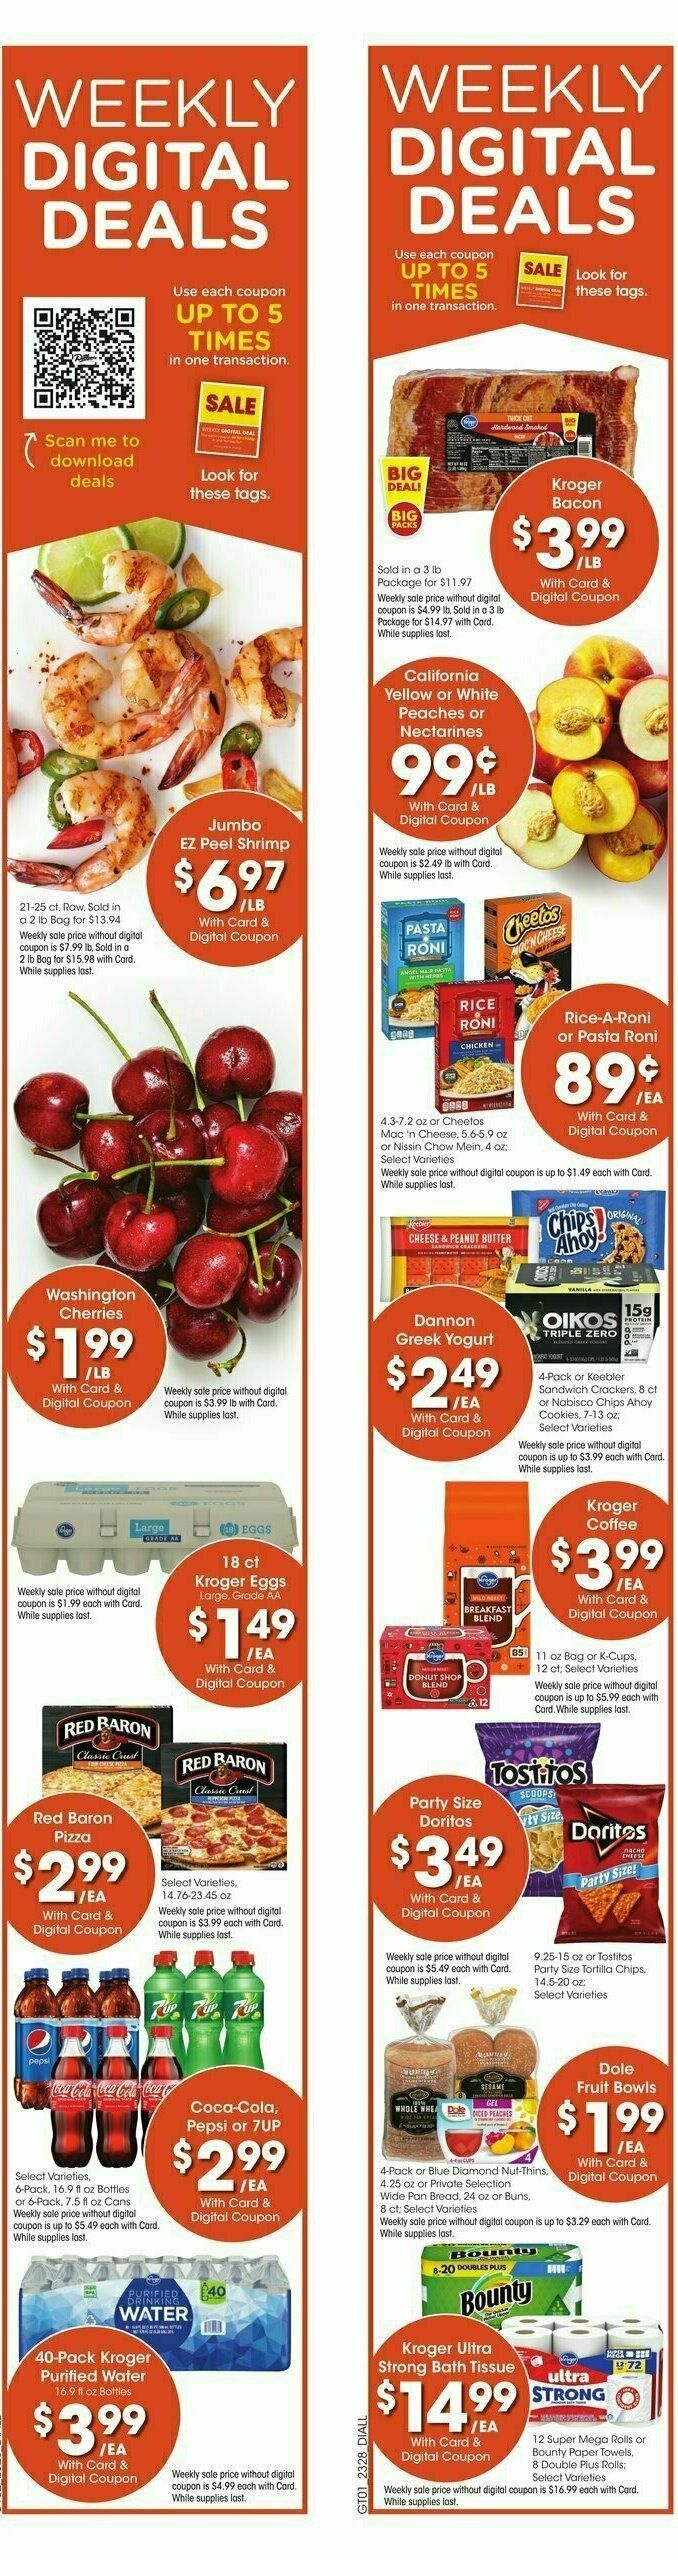 Dillons Weekly Ad from August 9